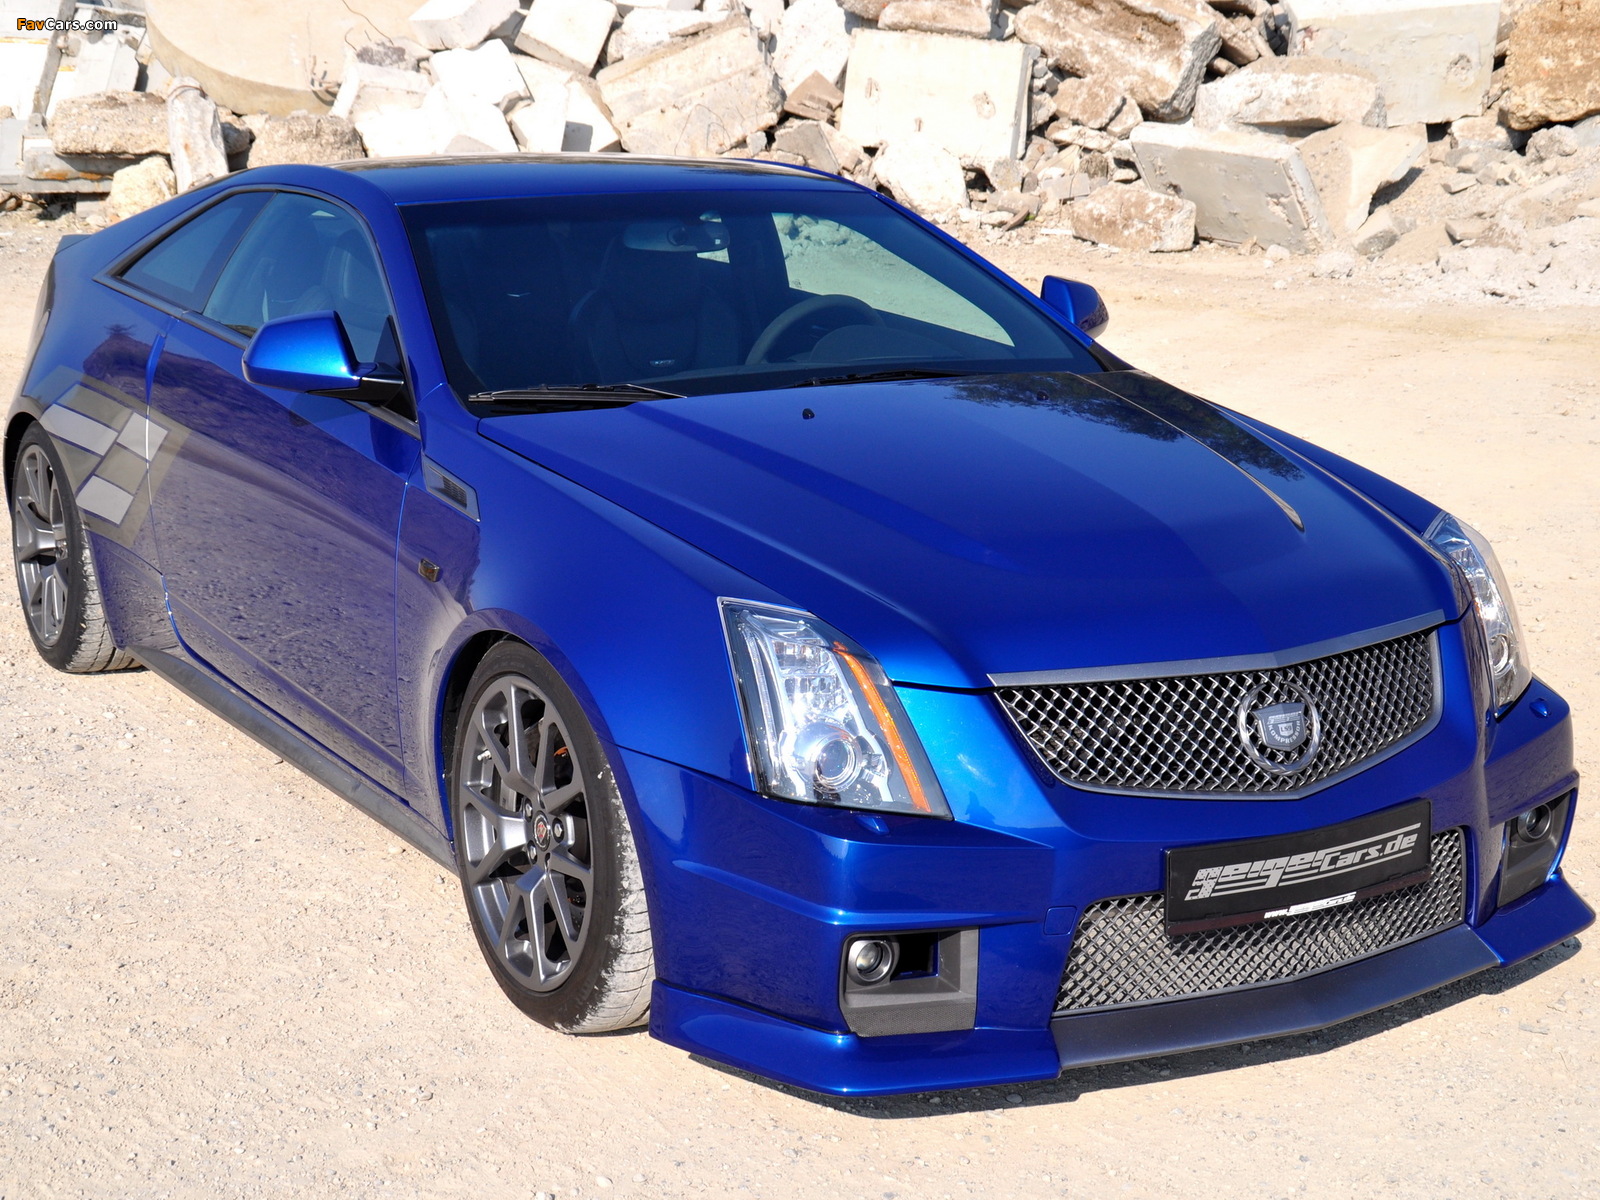 Geiger Cadillac CTS-V Coupe Blue Brute 2011 pictures (1600 x 1200)